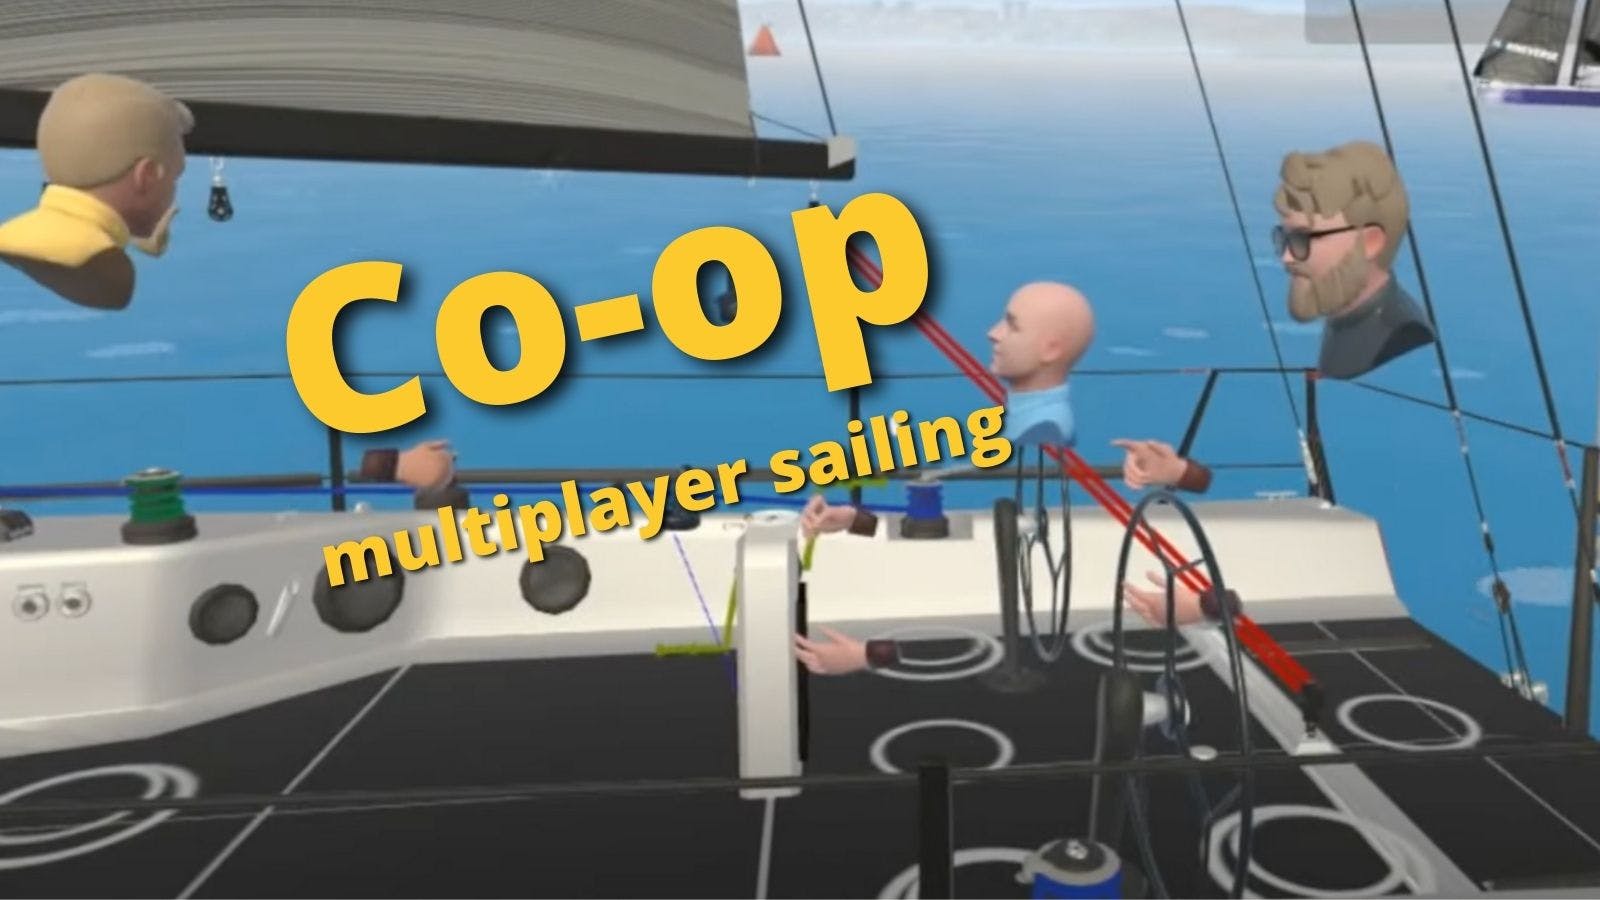 Co-op multiplayer sailing